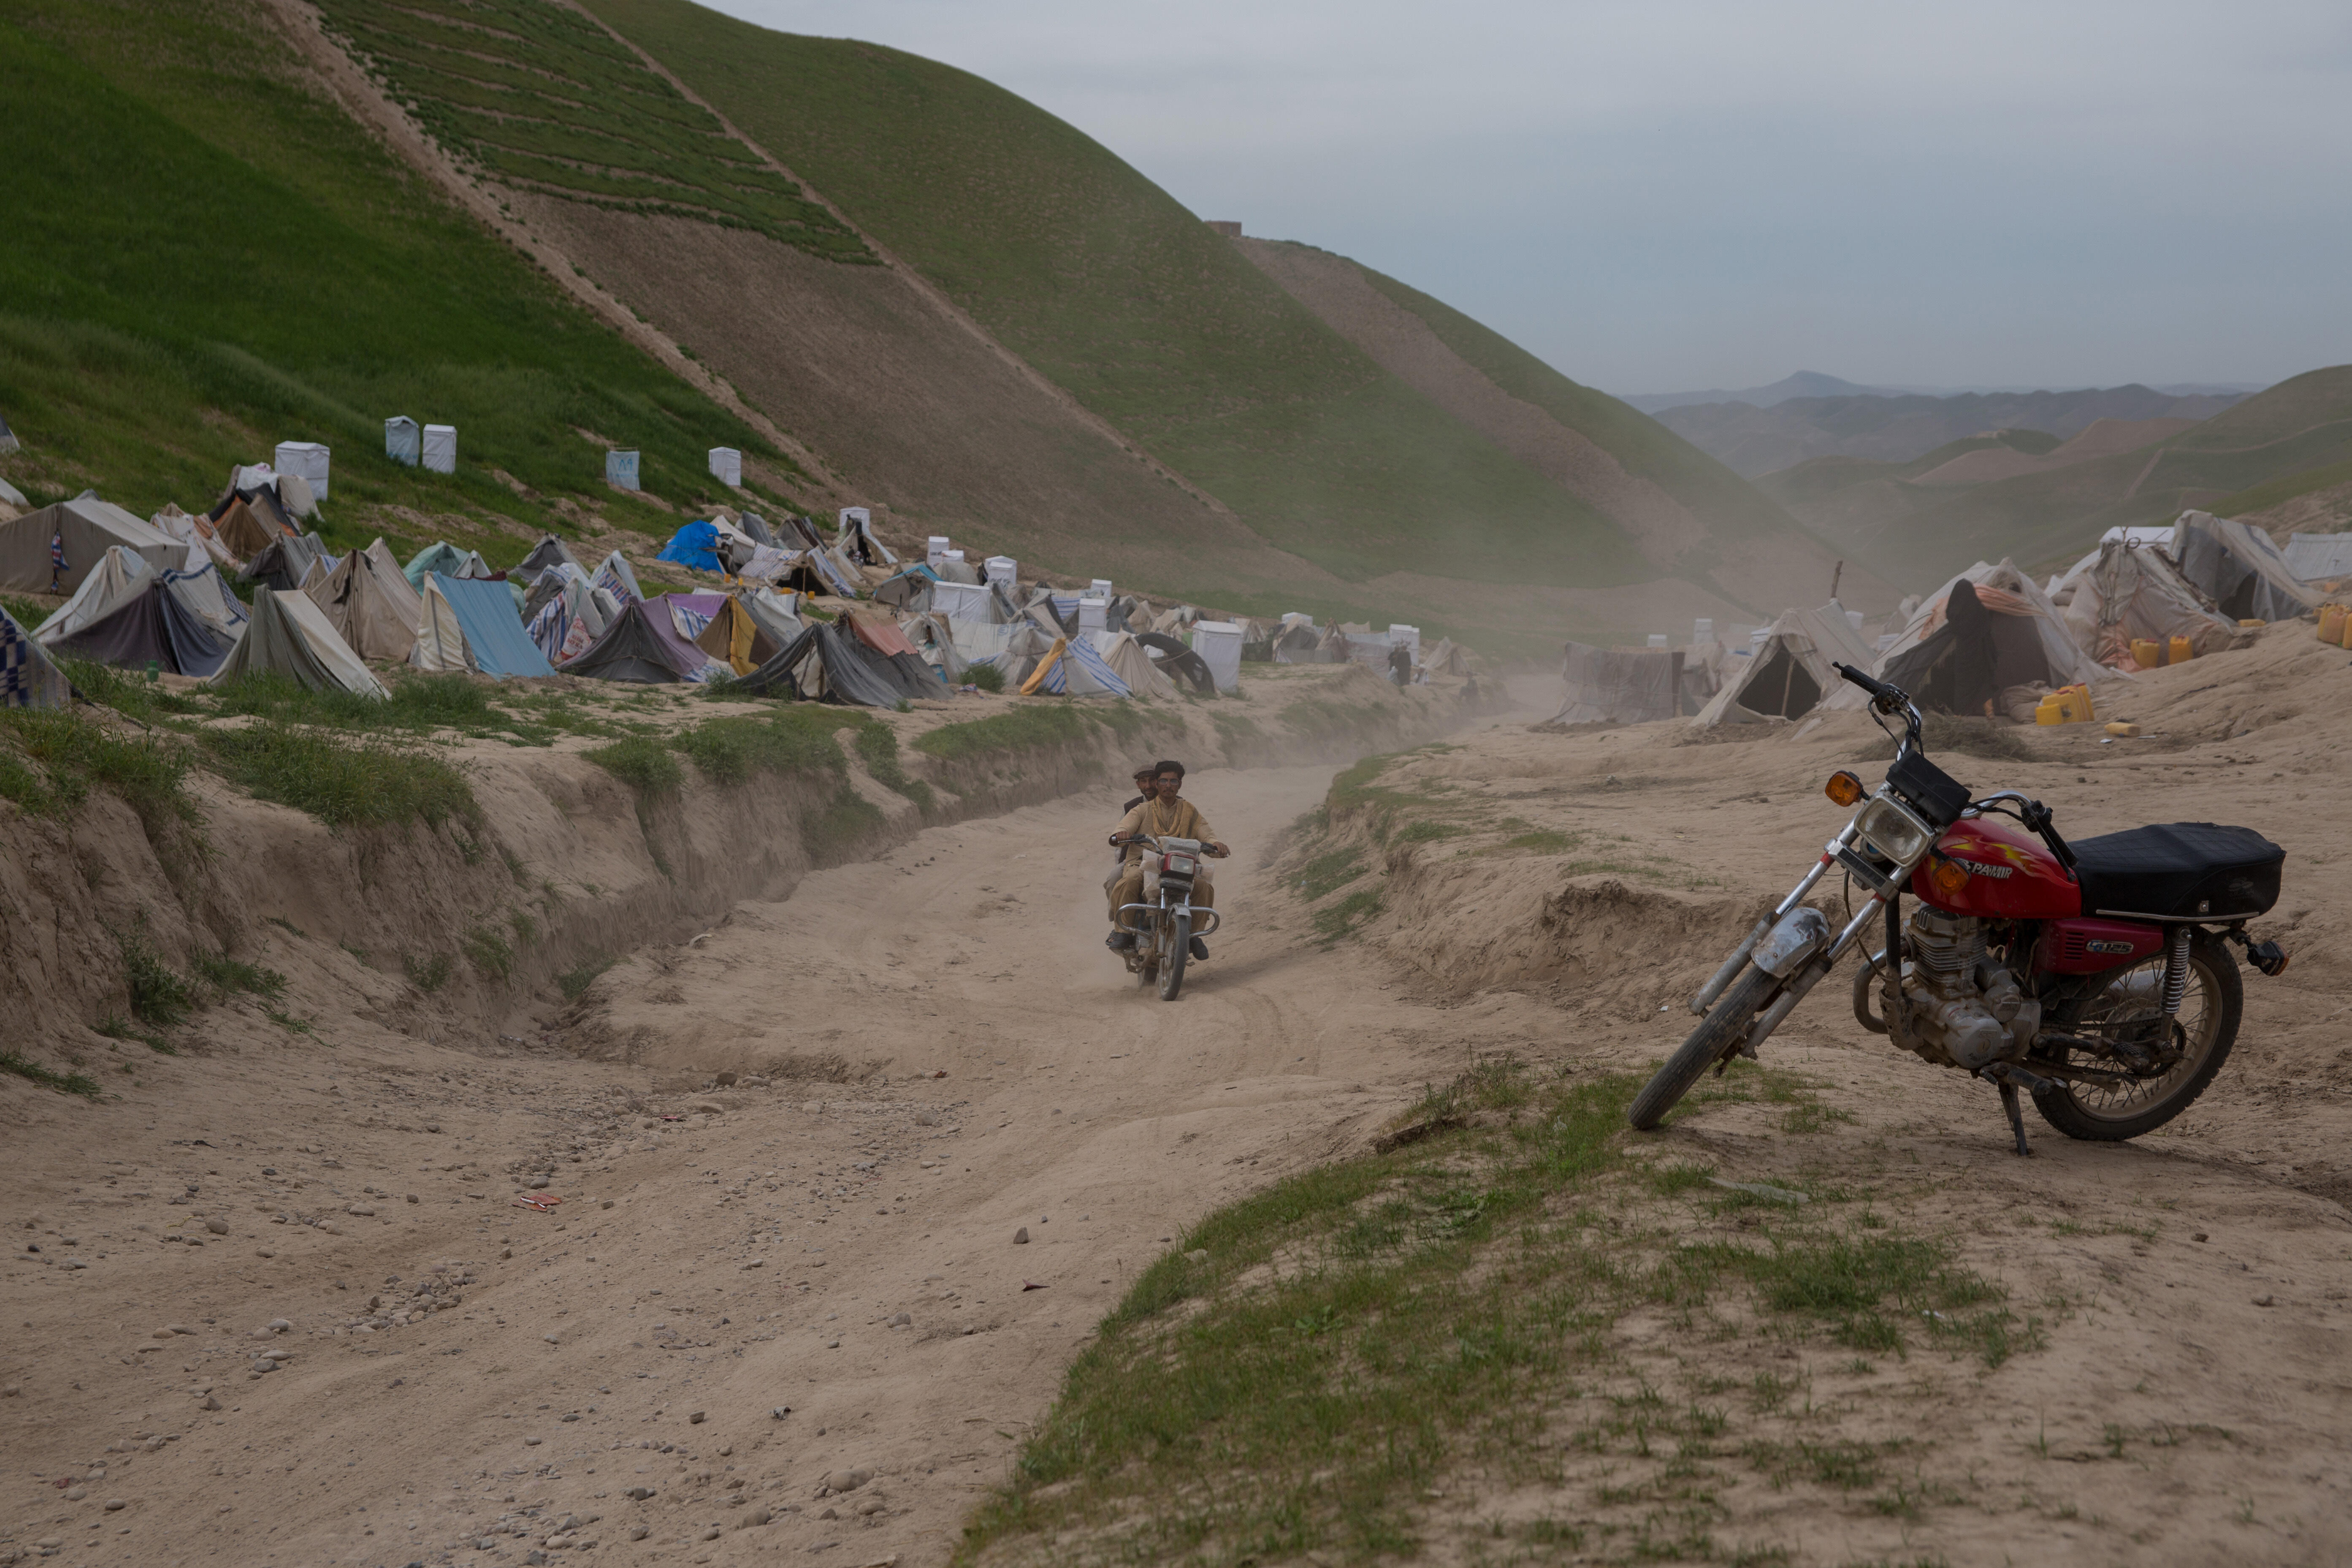 A camp for drought displaced people in Afghanistan. there is a motorcycle in the foreground as well as two men on a motorcycle on the road, and tents in the background on a mountainous landscape.